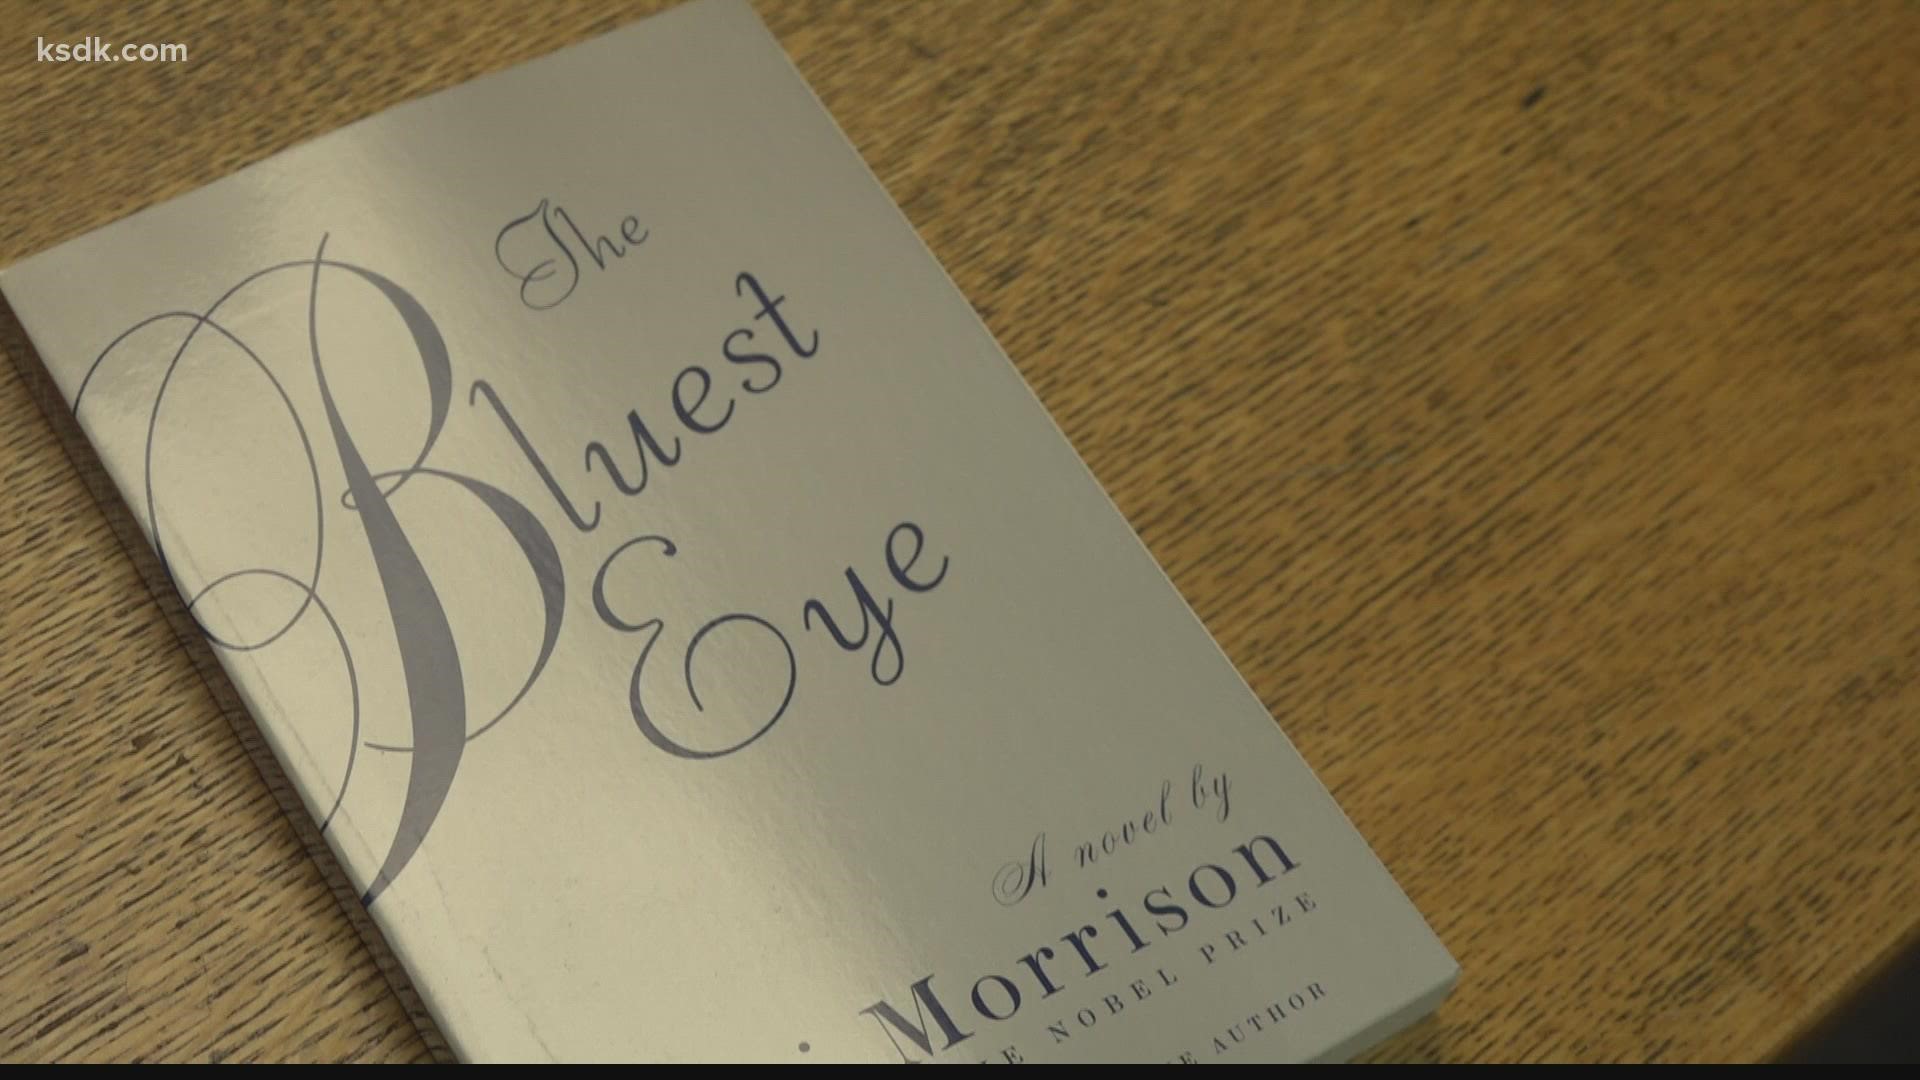 The Wentzville District made the decision to remove Toni Morrison's "The Bluest Eye" last month.